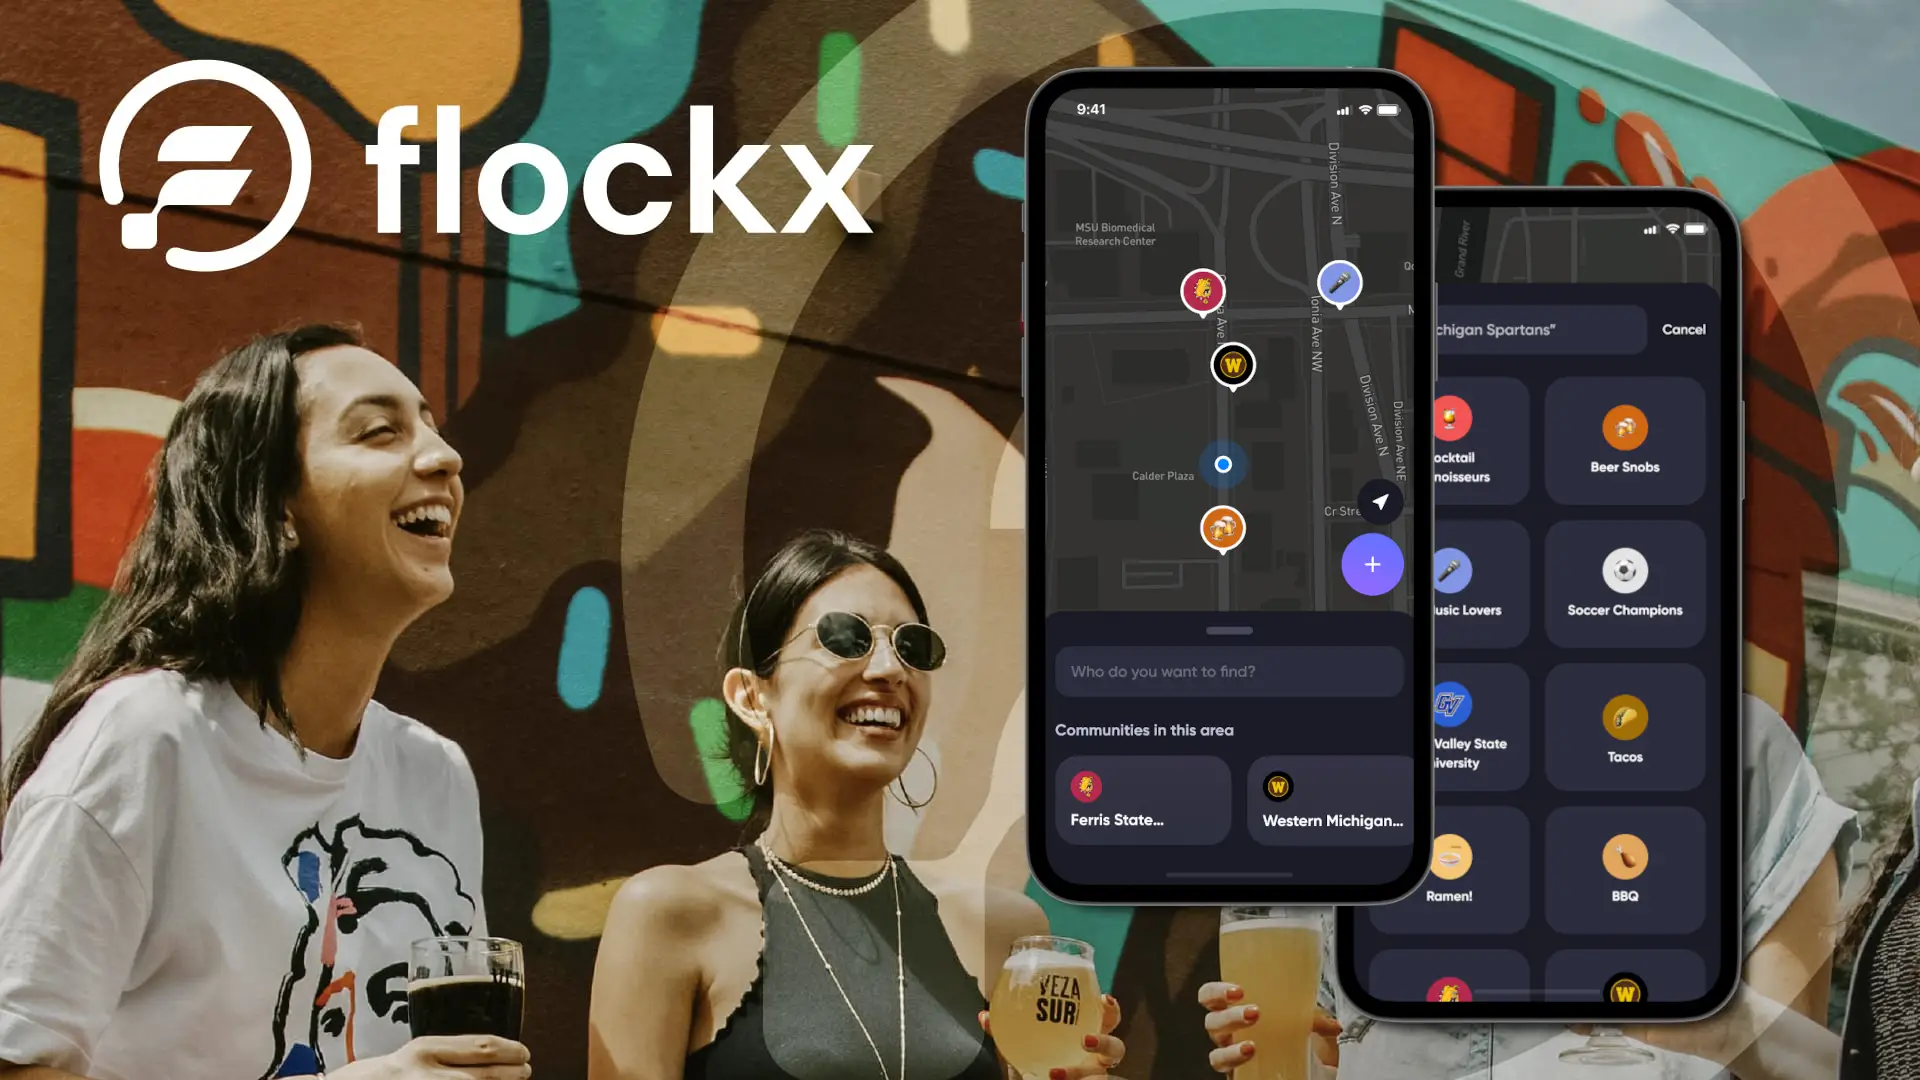 flockx mobile app with search functionality!